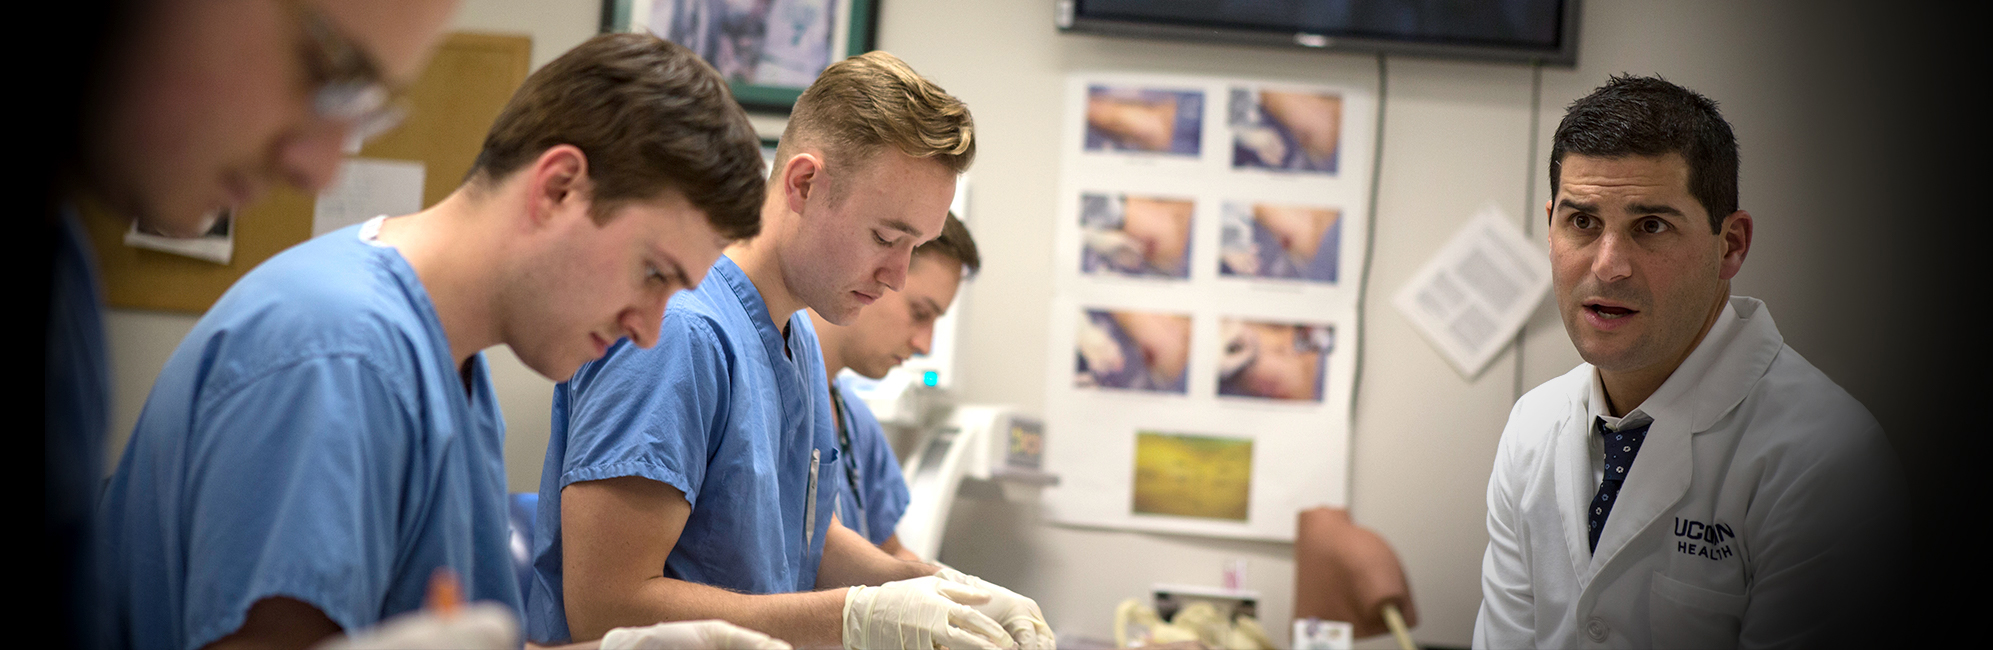 students in scrubs are guided by lab professional